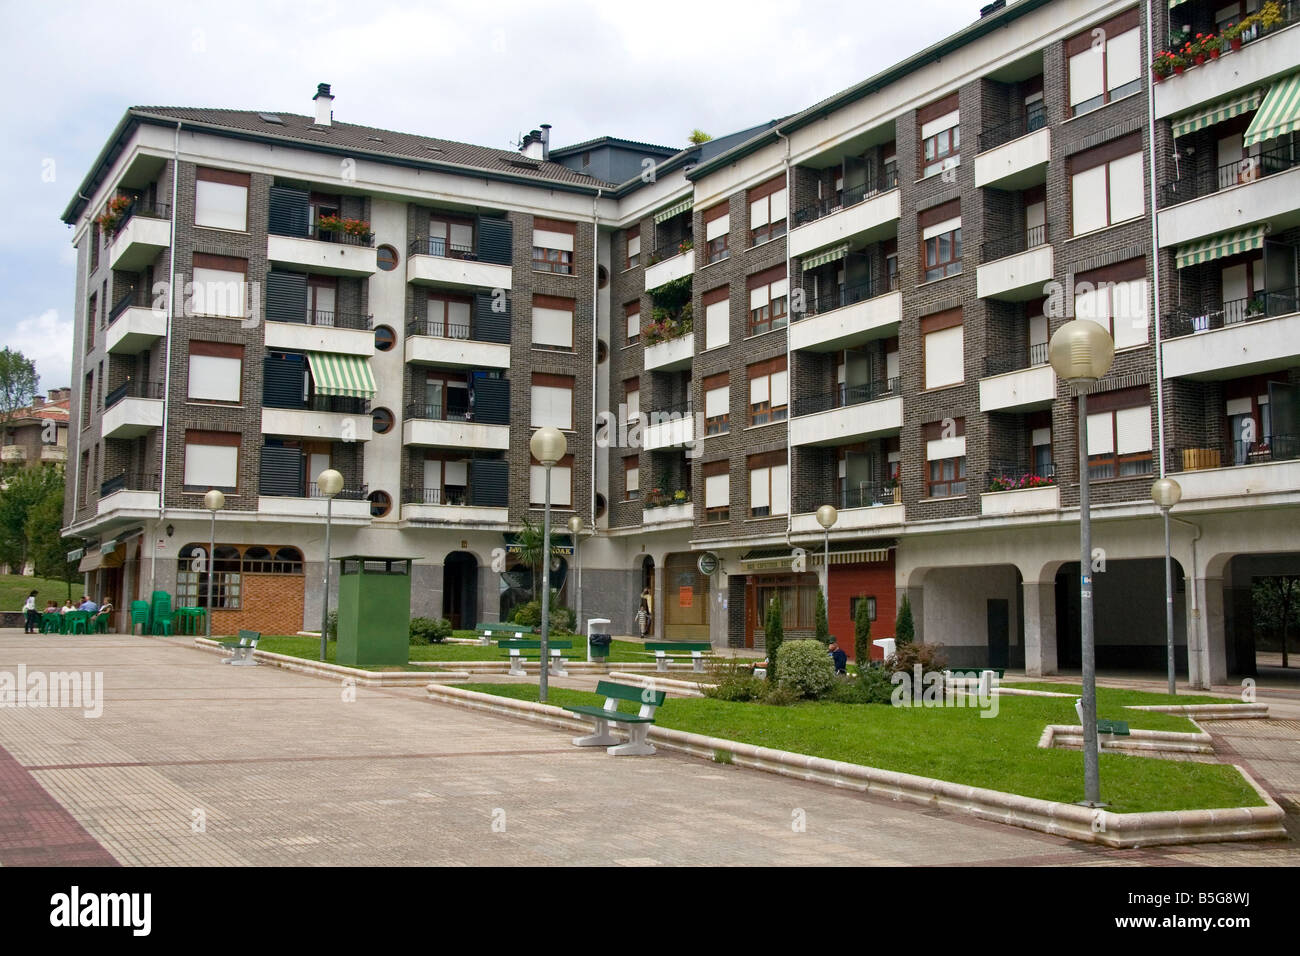 Apartment housing unit at Guernica in the province of Biscay Basque Country Northern Spain Stock Photo